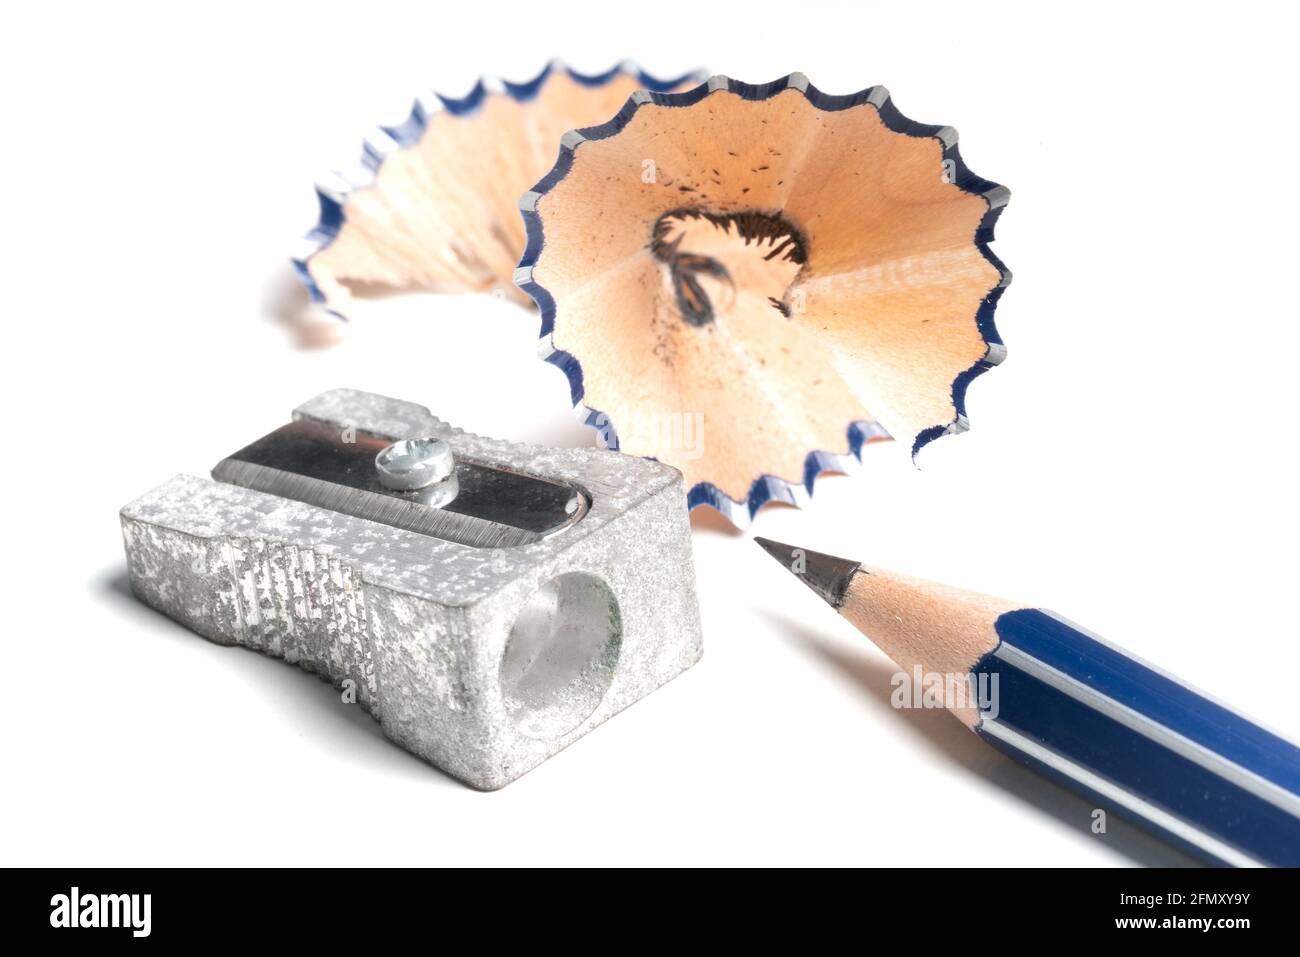 high angle view of sharp pencil, pencil sharpener and shavings on white desk Stock Photo